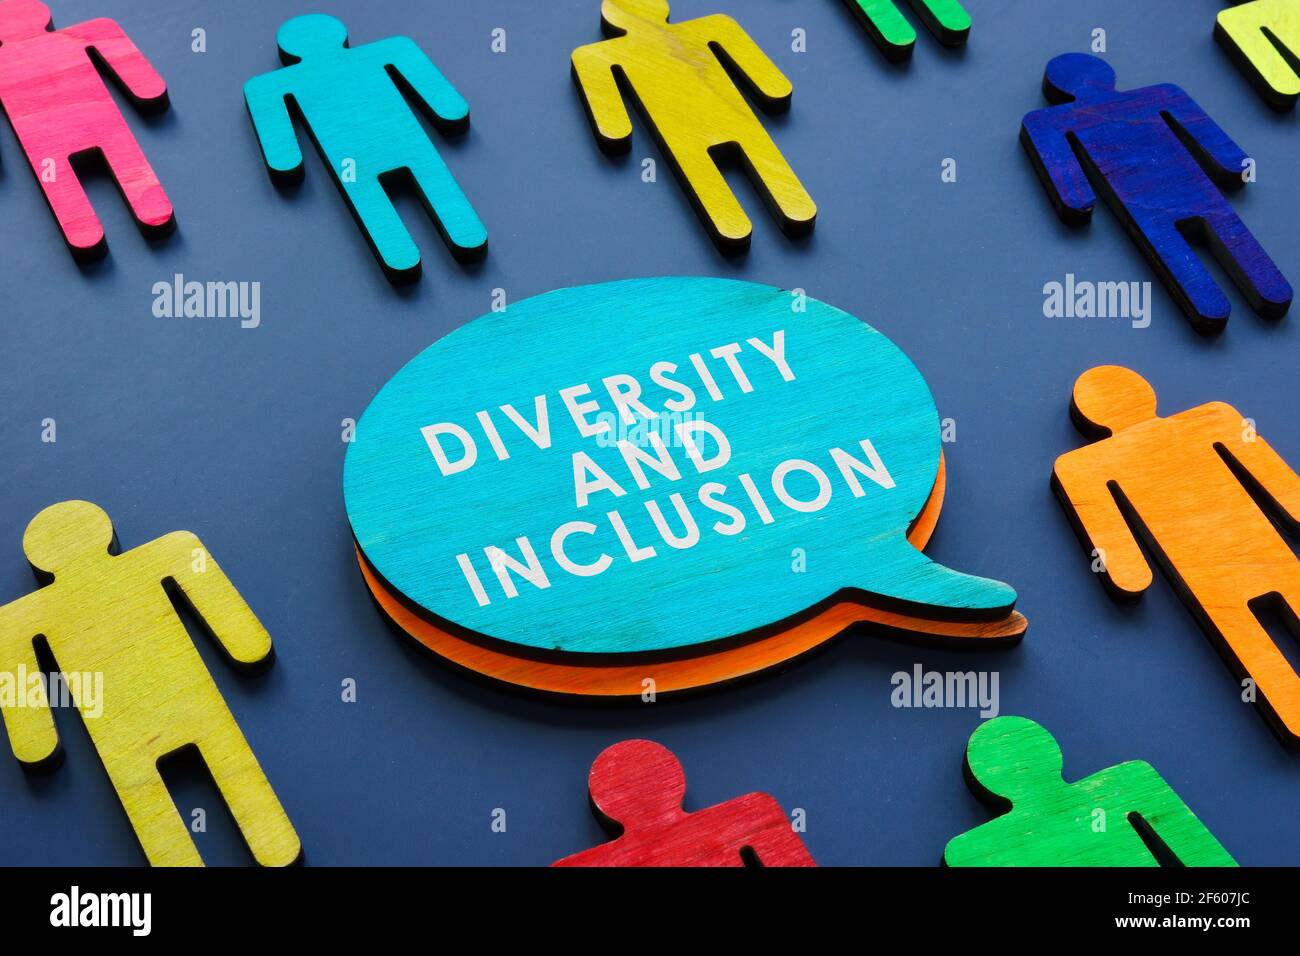 Diversity and inclusion as symbol of colorful figures. Stock Photo